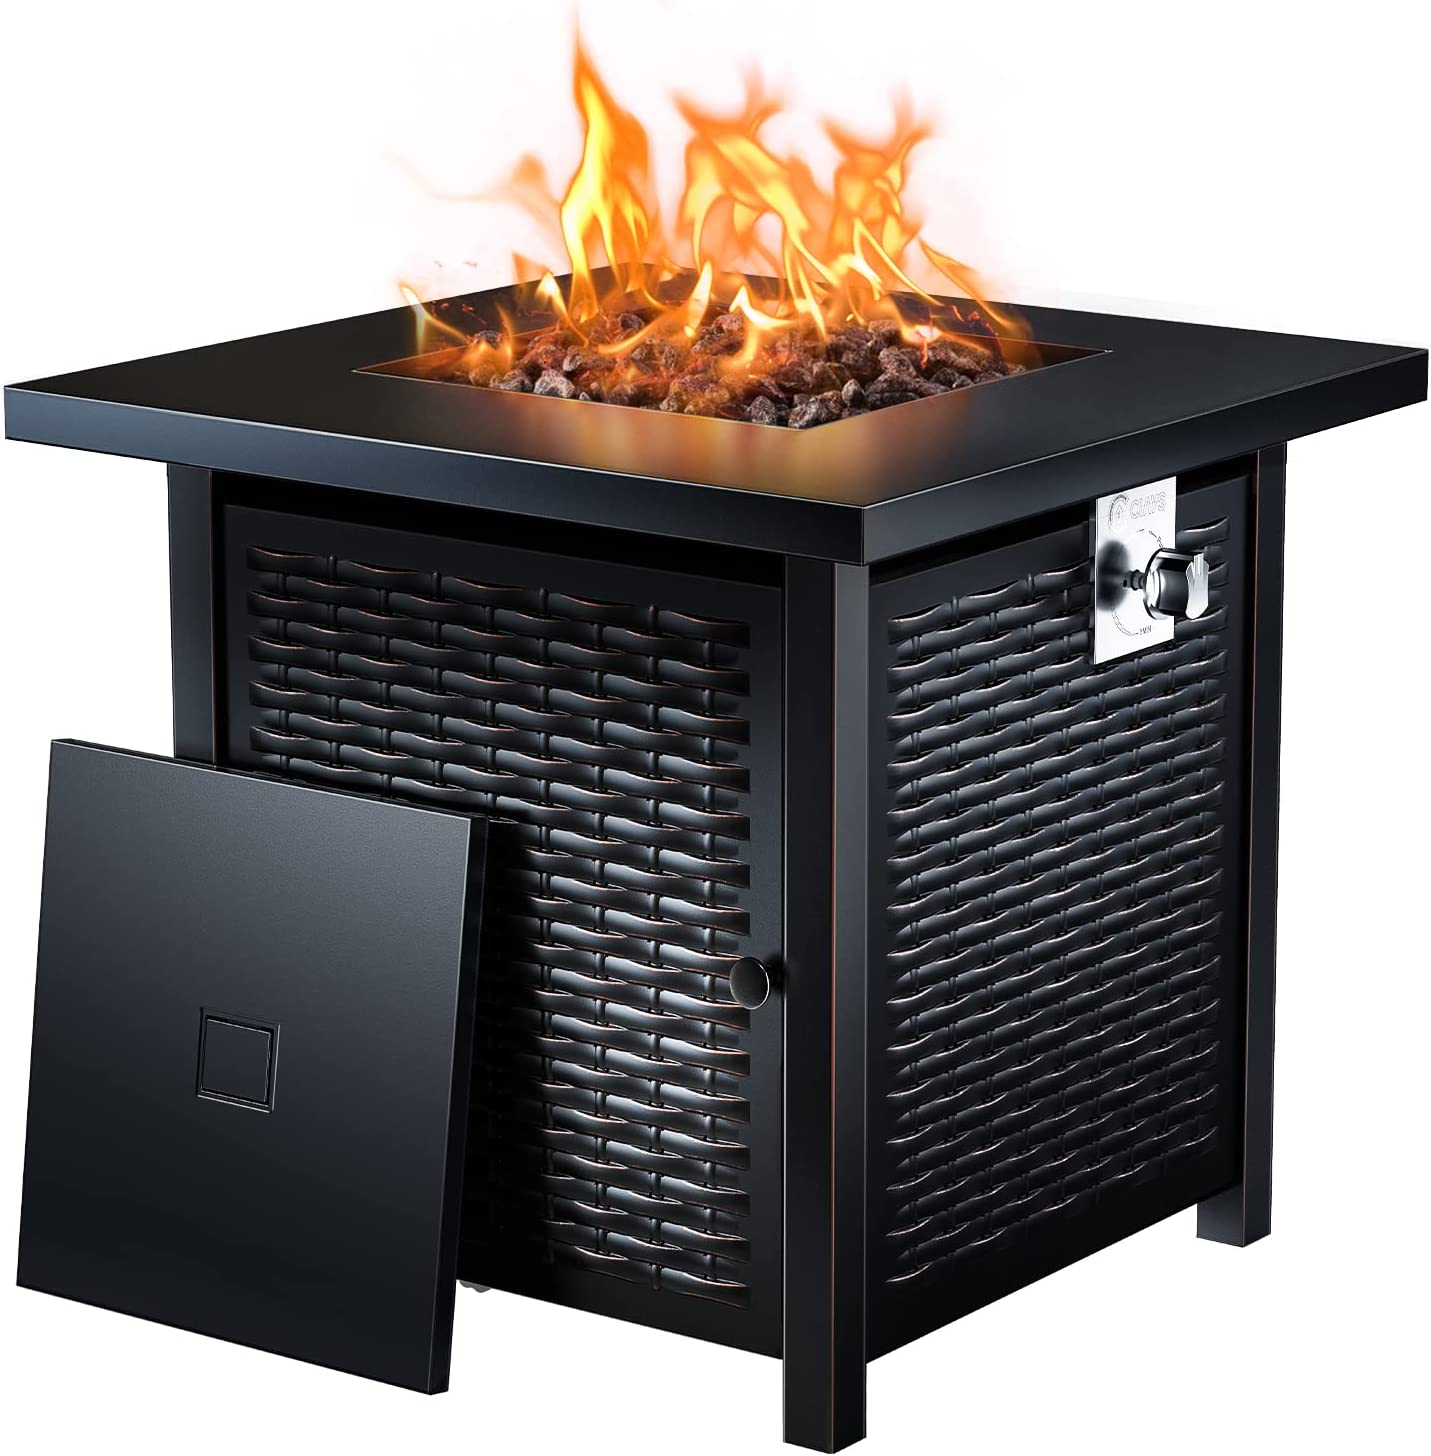 Ciyas fire pit table